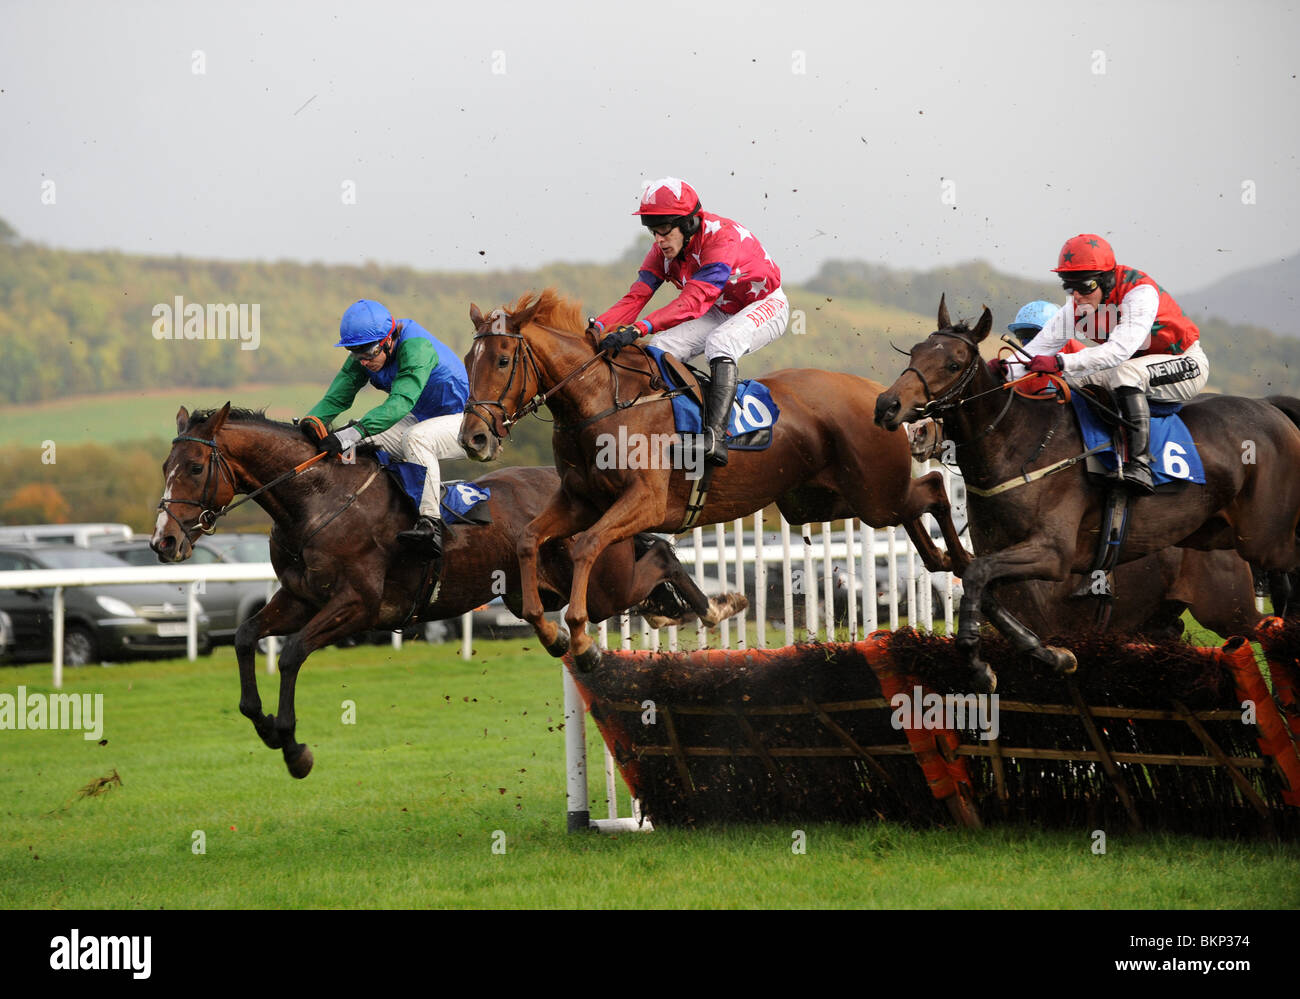 Horse racing over hurdles at Ludlow Race Course in Shropshire Uk Stock Photo